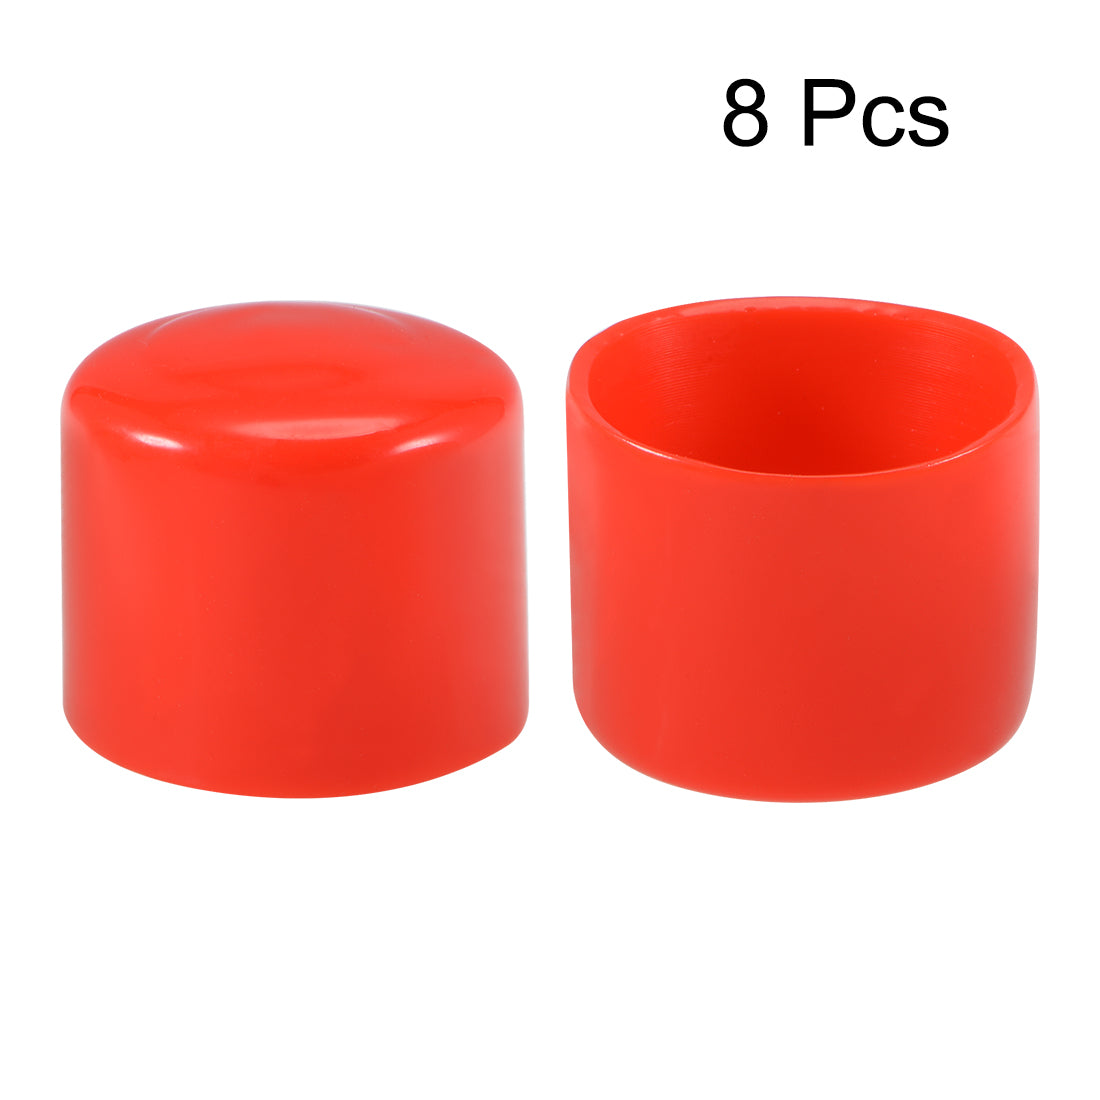 uxcell Uxcell 8pcs Rubber End Caps 48mm ID 41mm Height Screw Thread Protectors Red